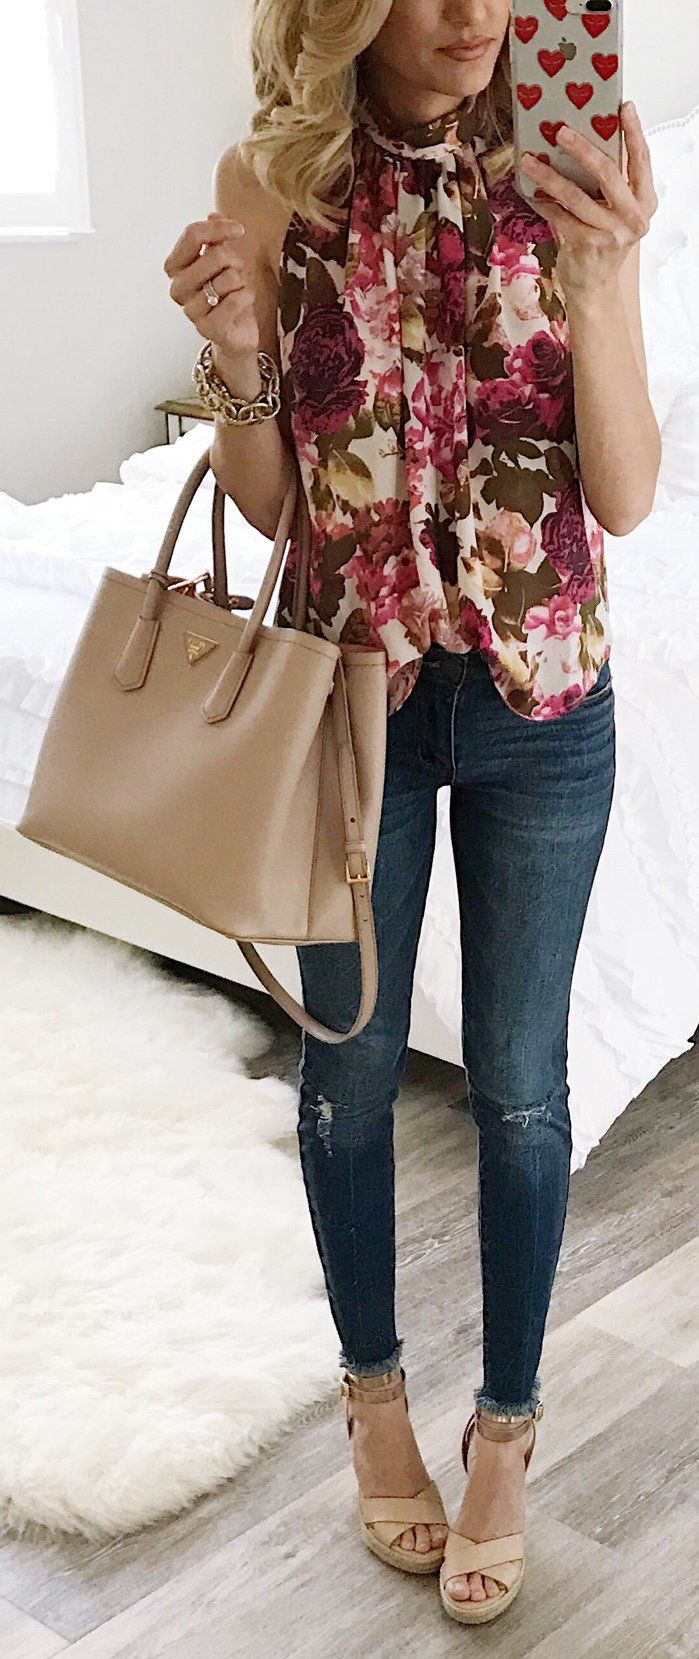 25 Flirty Outfits To Wear for Spring 2018 - Outfit Ideas for Women